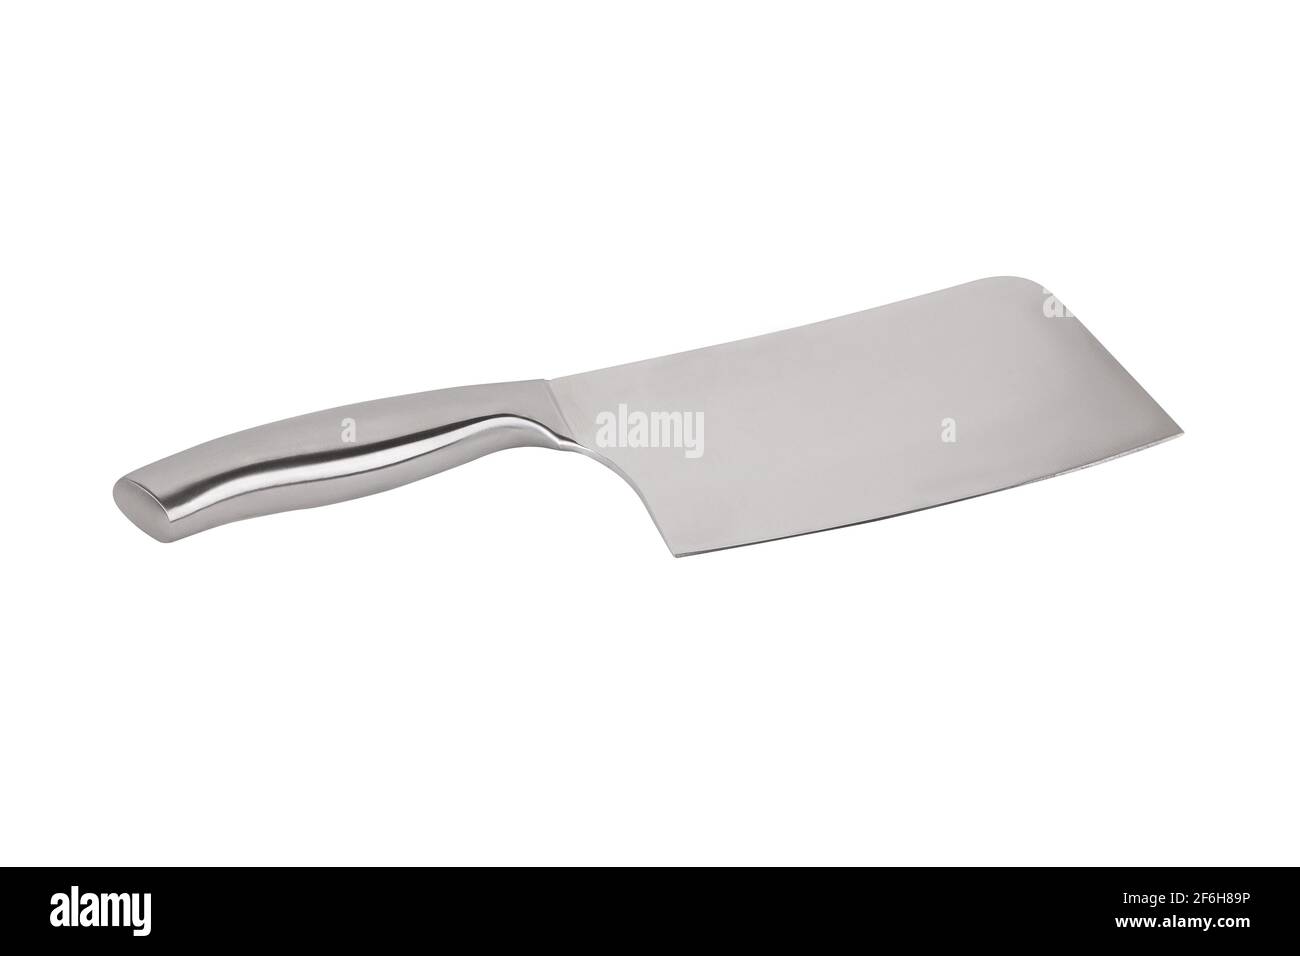 Stainless steel butcher's knife isolated on white background. Meat cleaver knife. Stock Photo